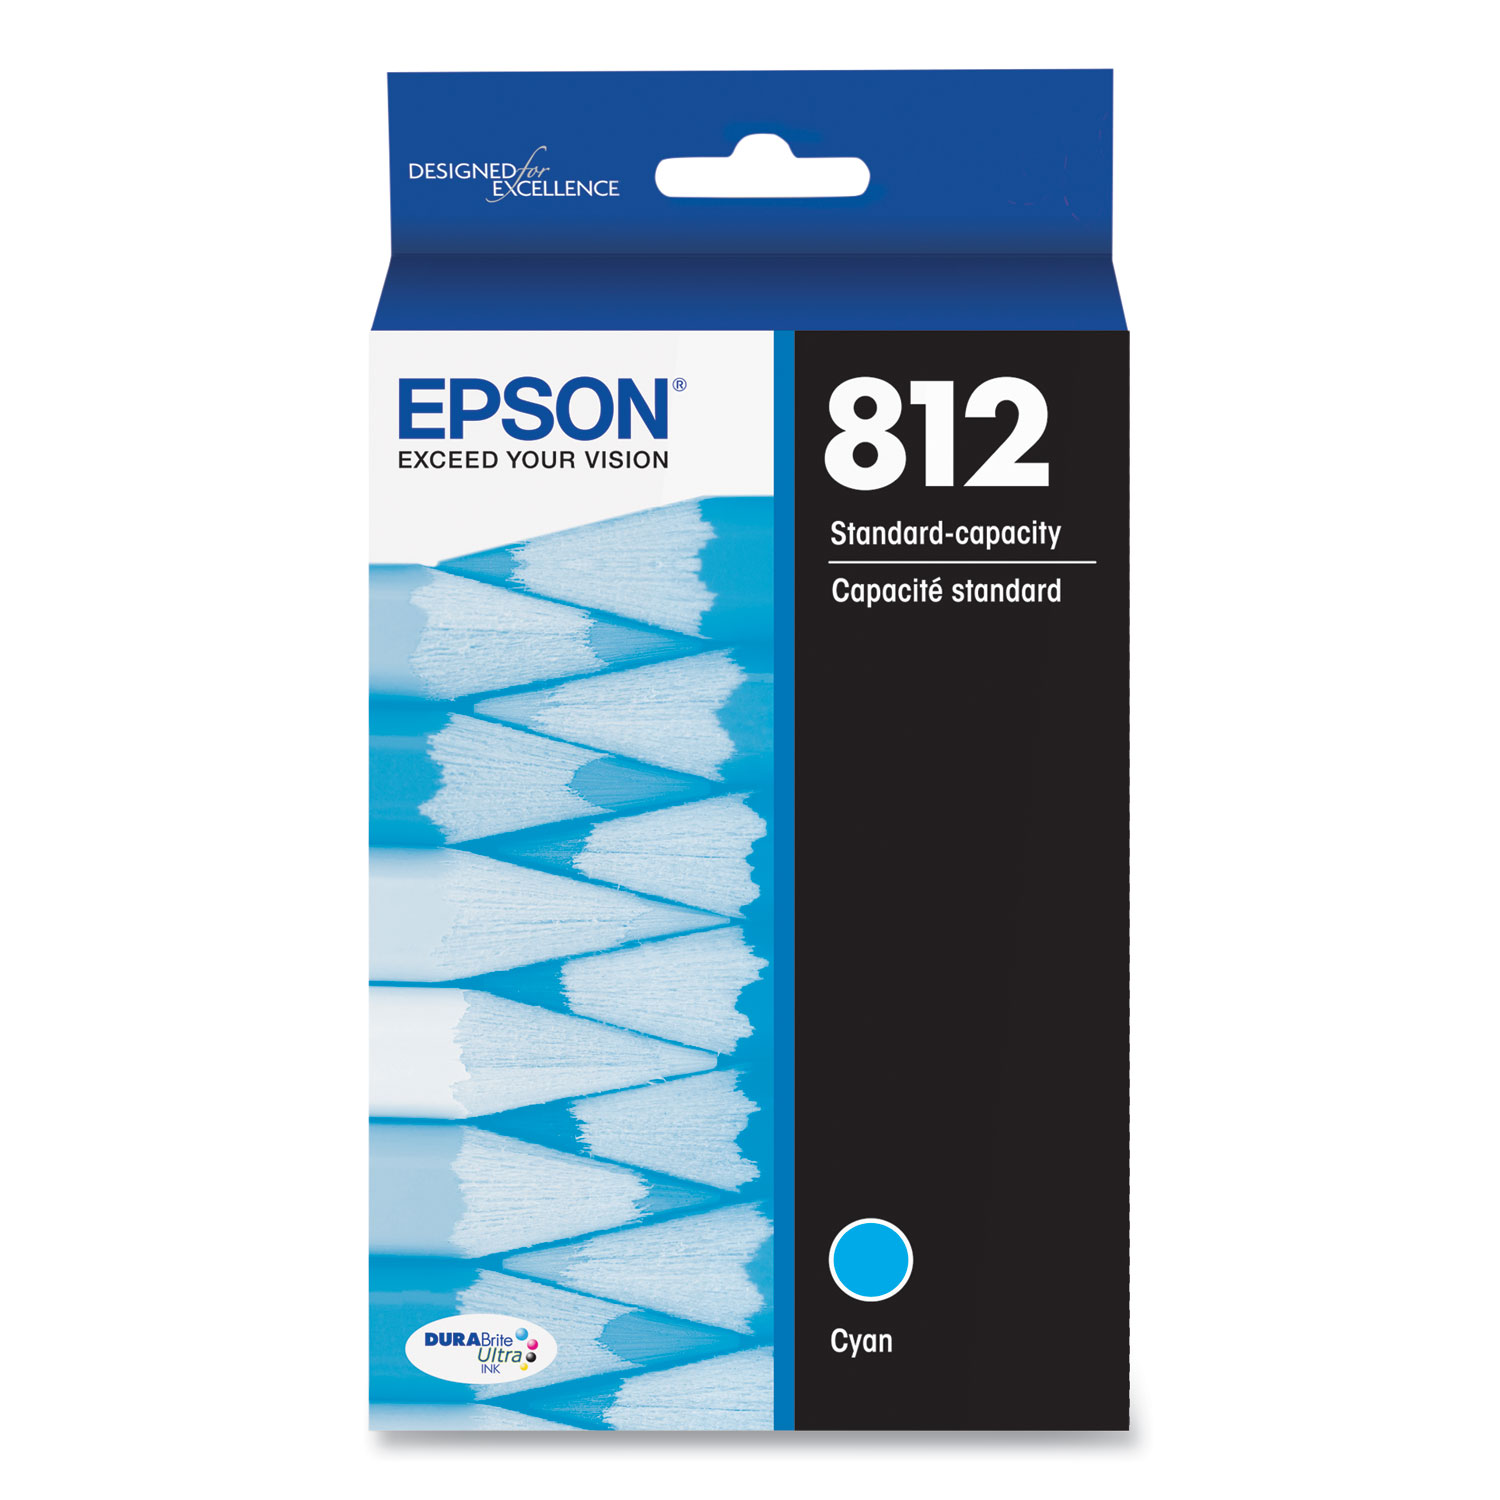 Epson® T812220S (T812) DURABrite Ultra Ink, 300 Page-Yield, Cyan